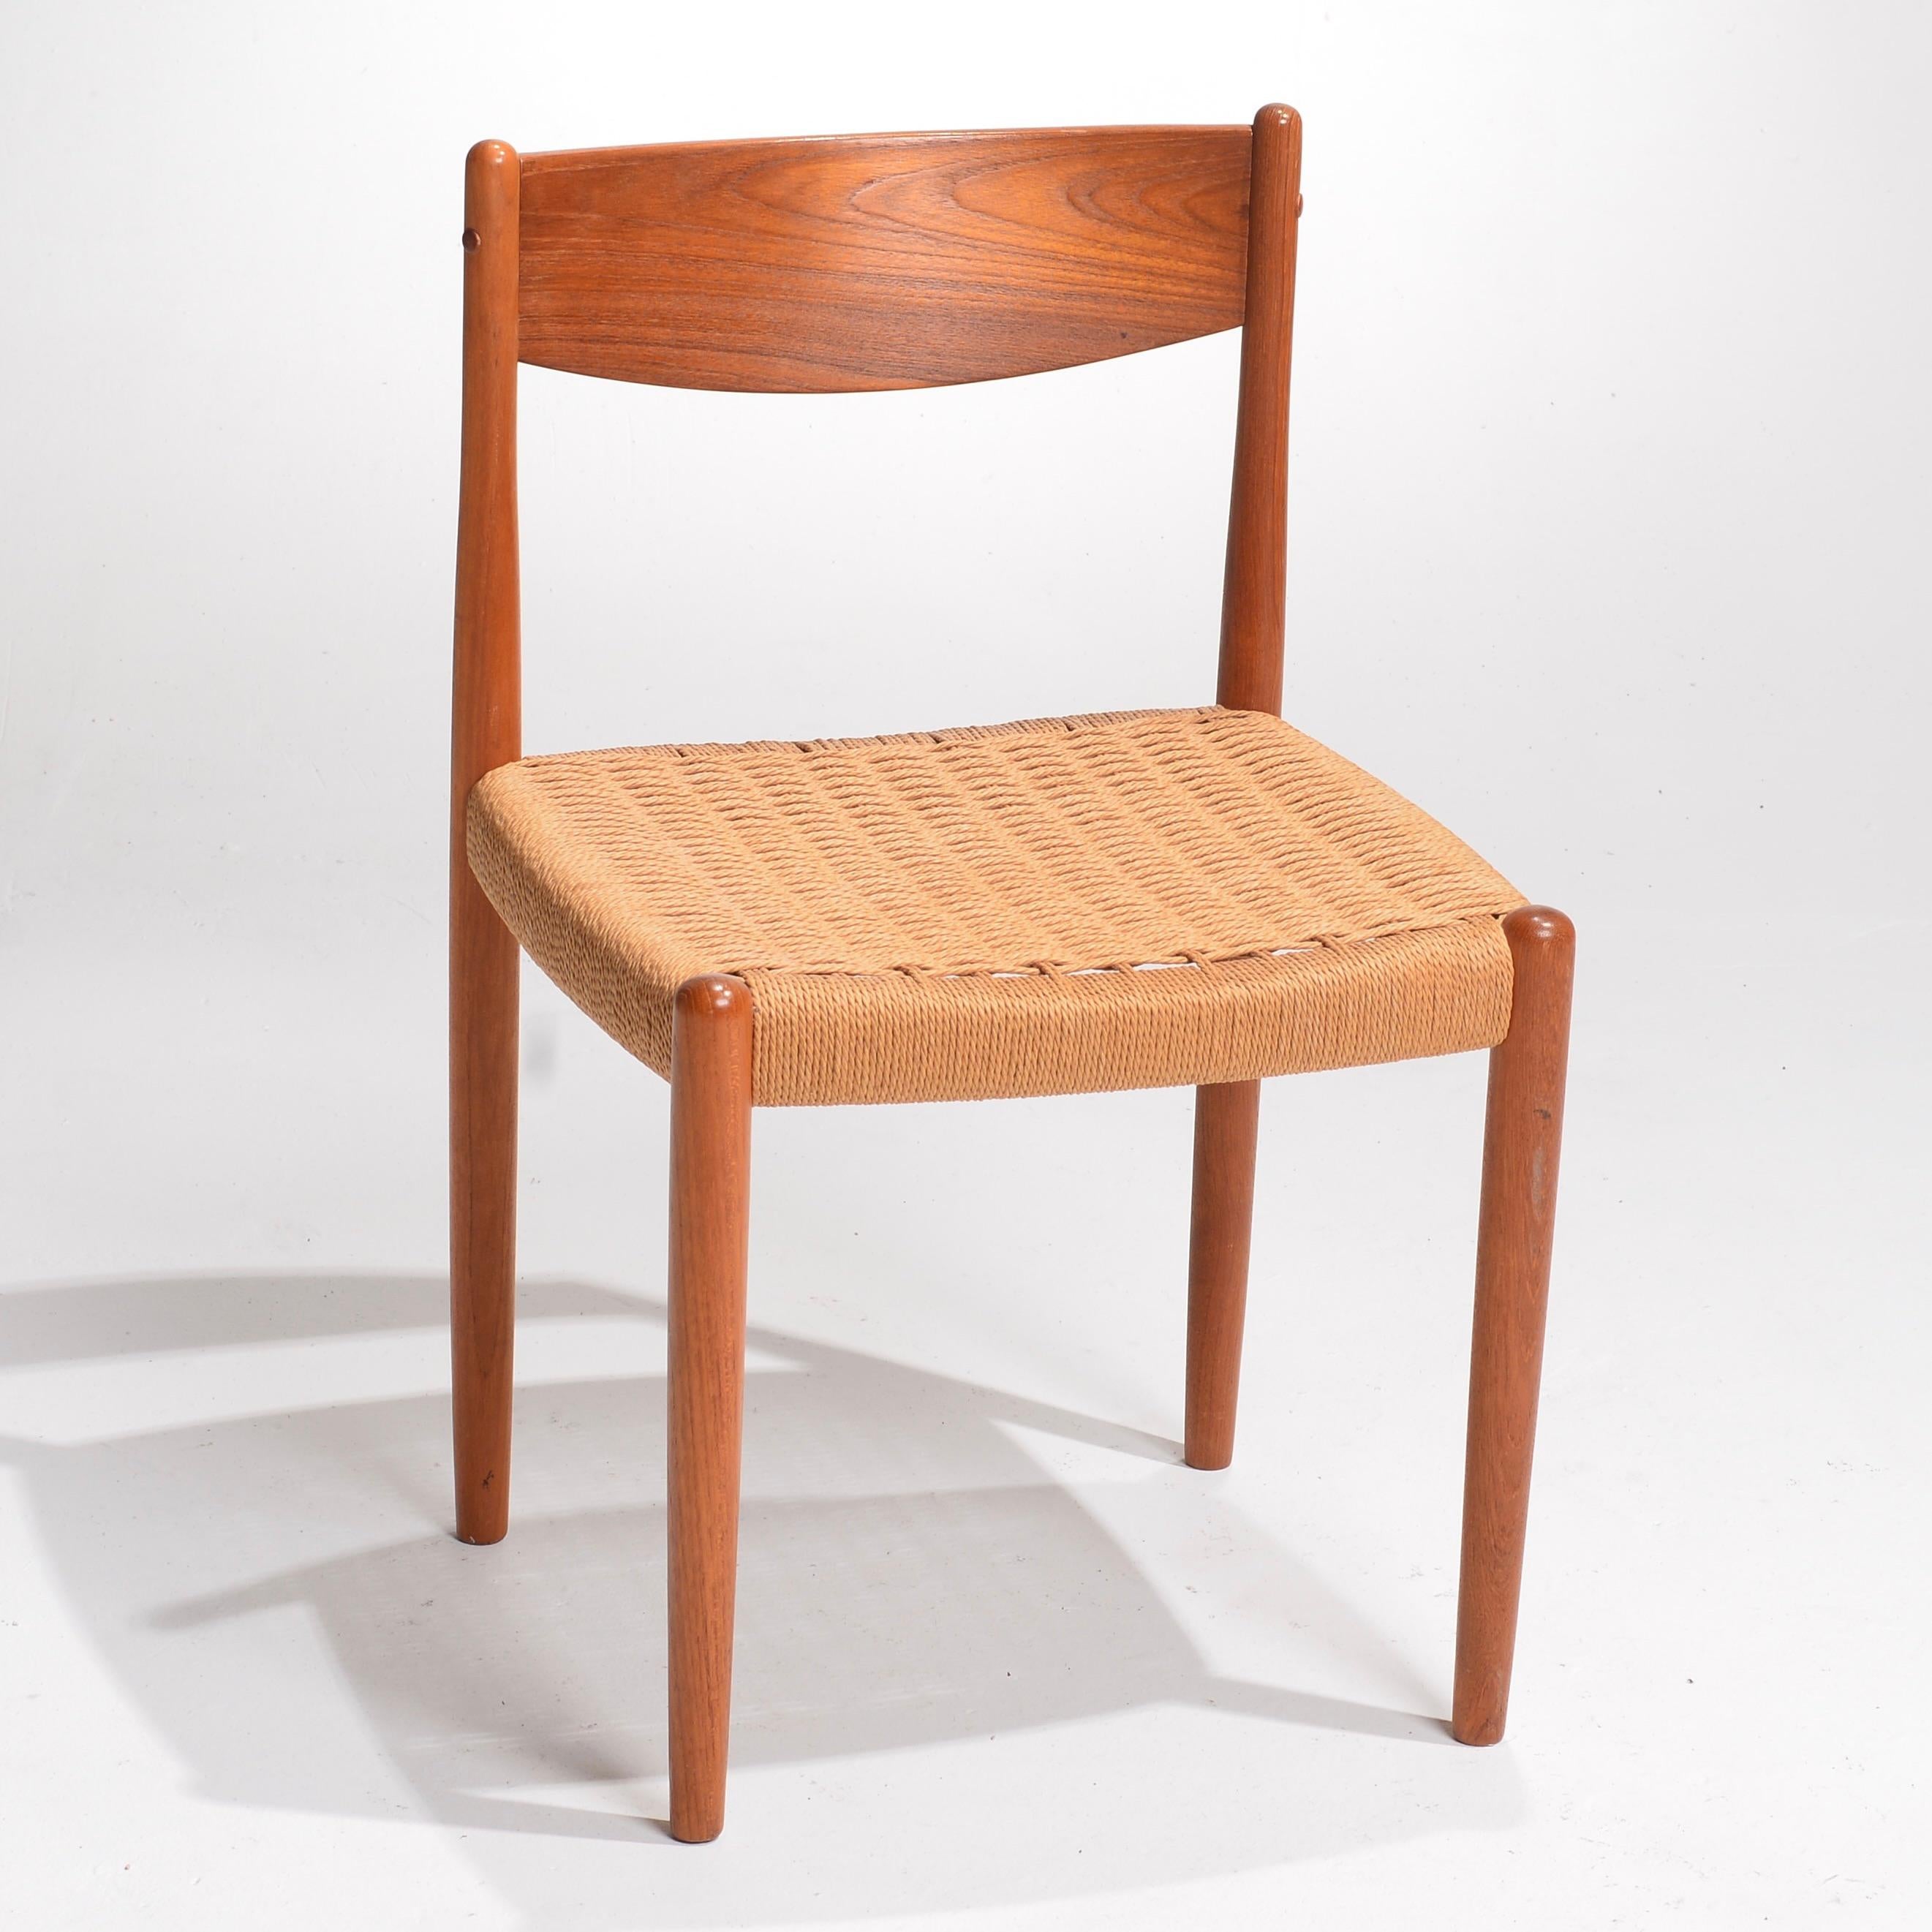 Poul Volther was a visionary Danish furniture designer renowned for his iconic creations in the midcentury modern era. His legacy lives on in masterpieces like the Frem Rojle Danish Teak Woven Chair, a timeless gem that encapsulates the essence of